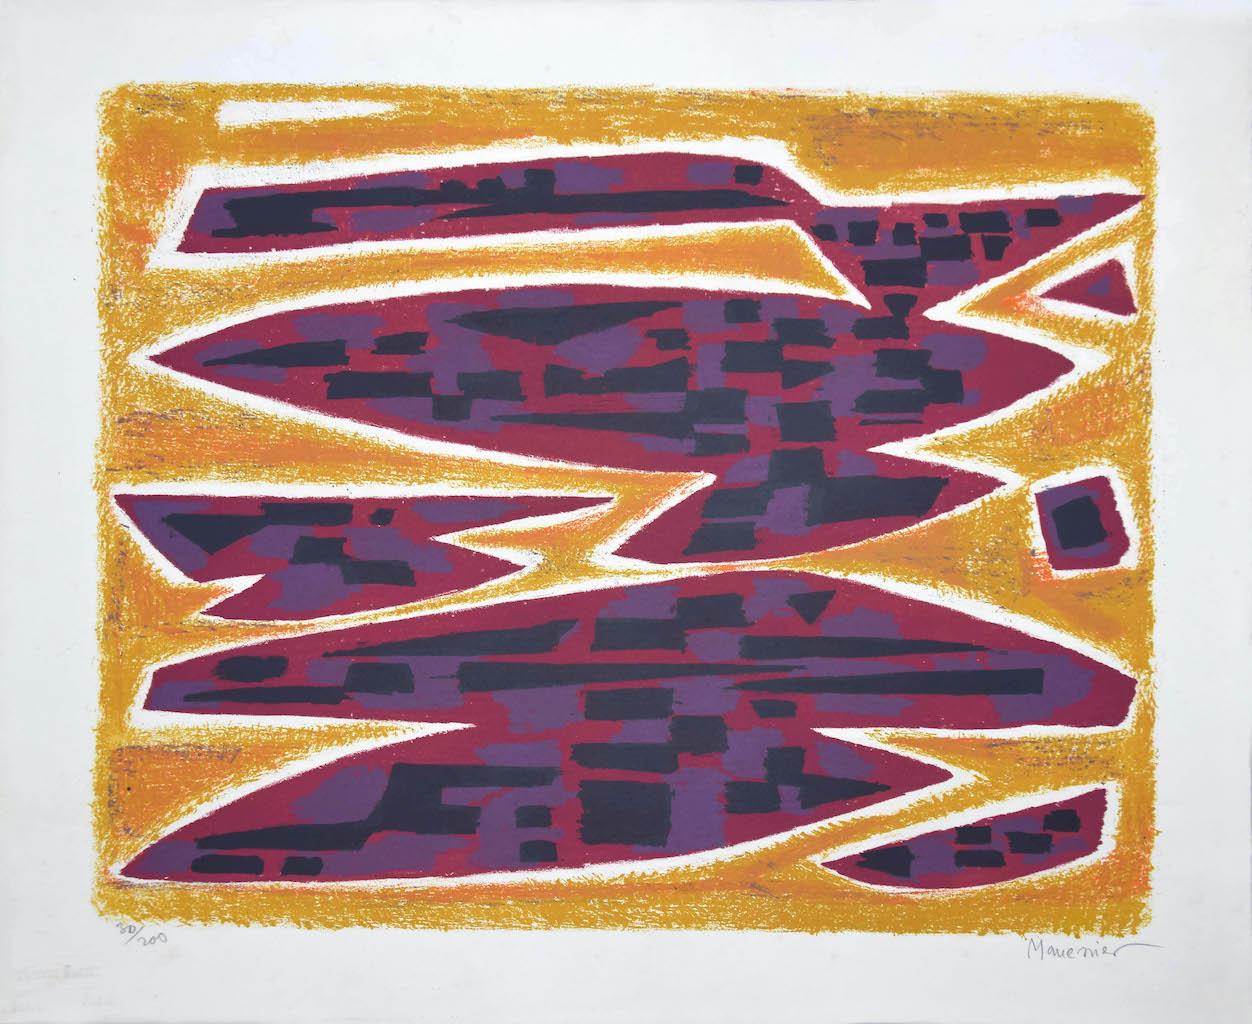 Alfred MANESSIER Abstract Print - Composition - Lithograph by Alfred Manessier - 1970s